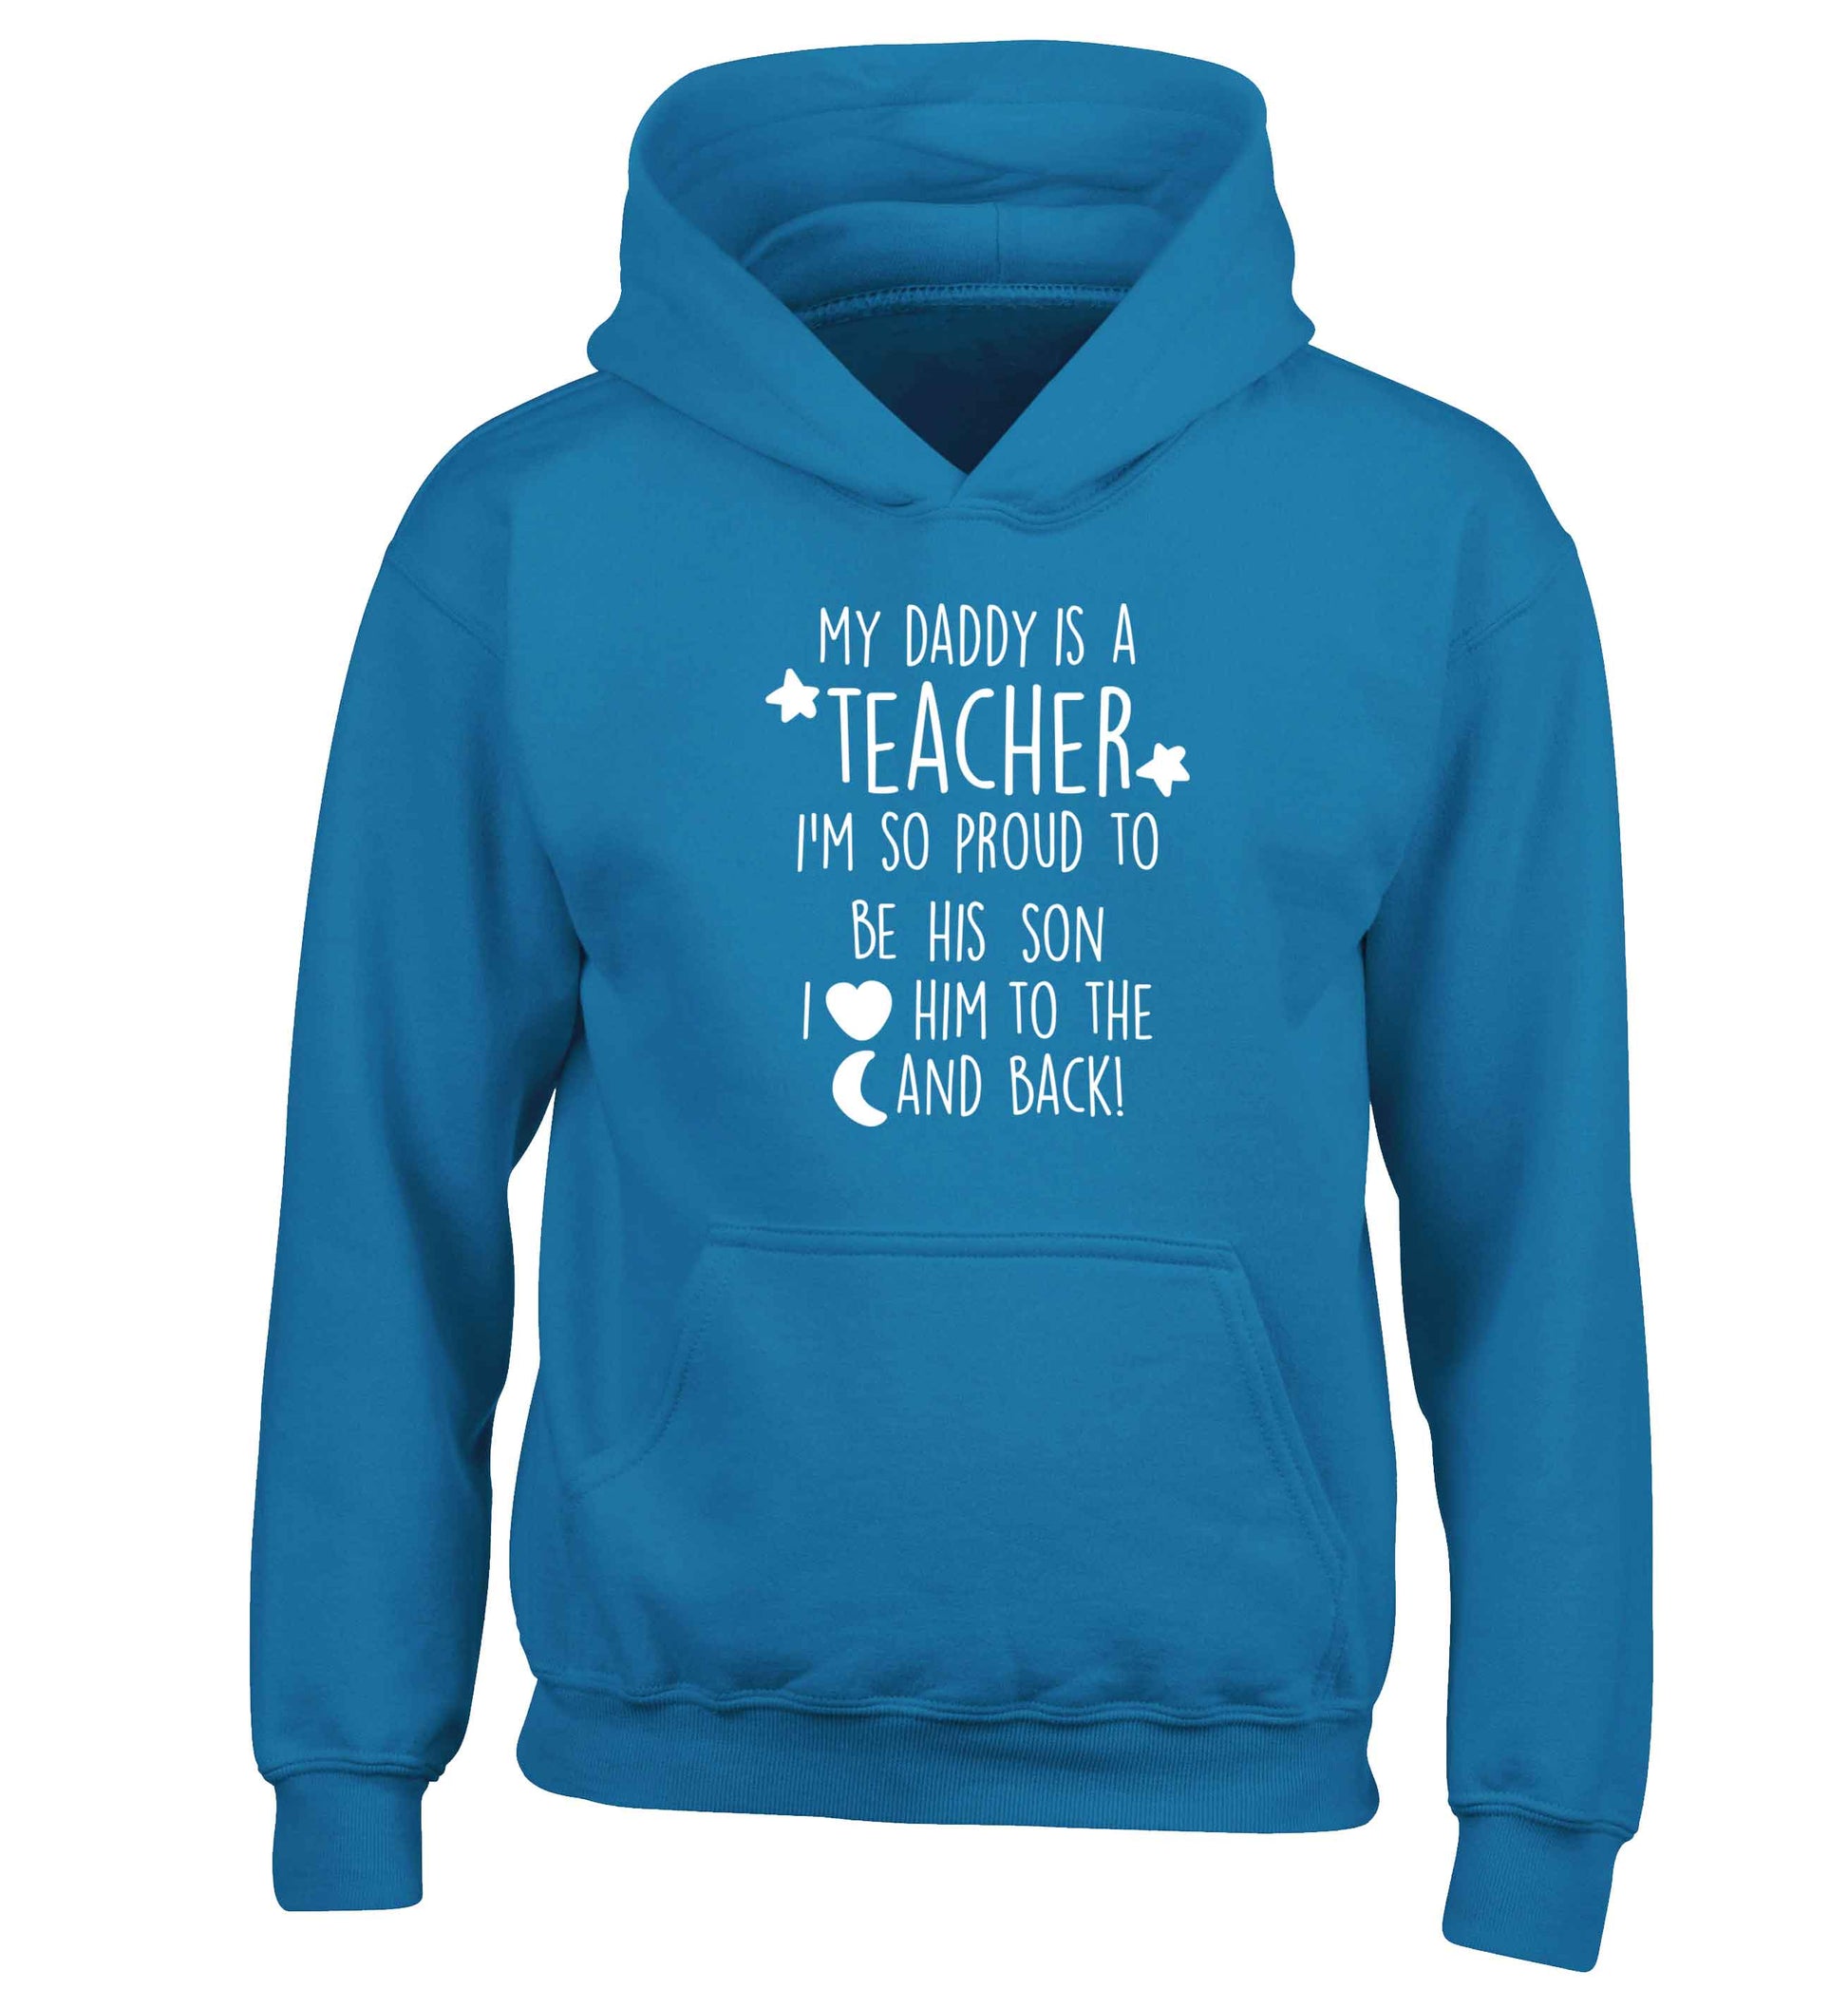 My daddy is a teacher I'm so proud to be his son I love her to the moon and back children's blue hoodie 12-13 Years